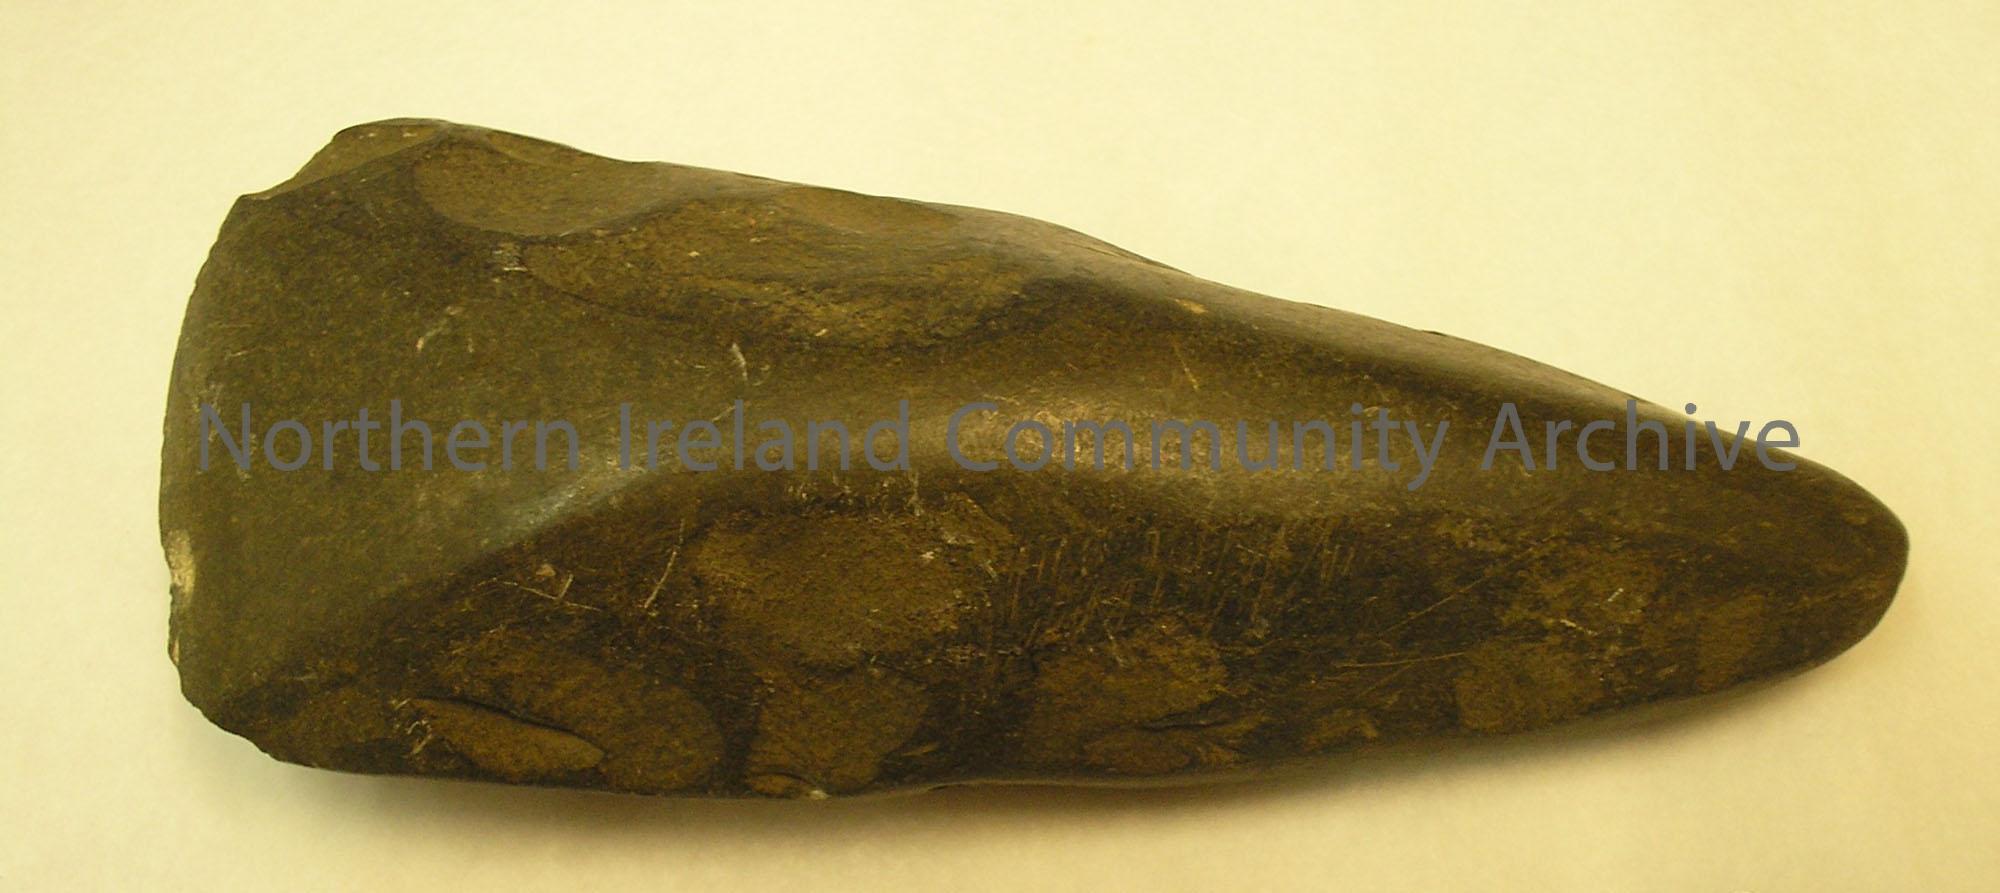 Polished stone axe head, neolithic period